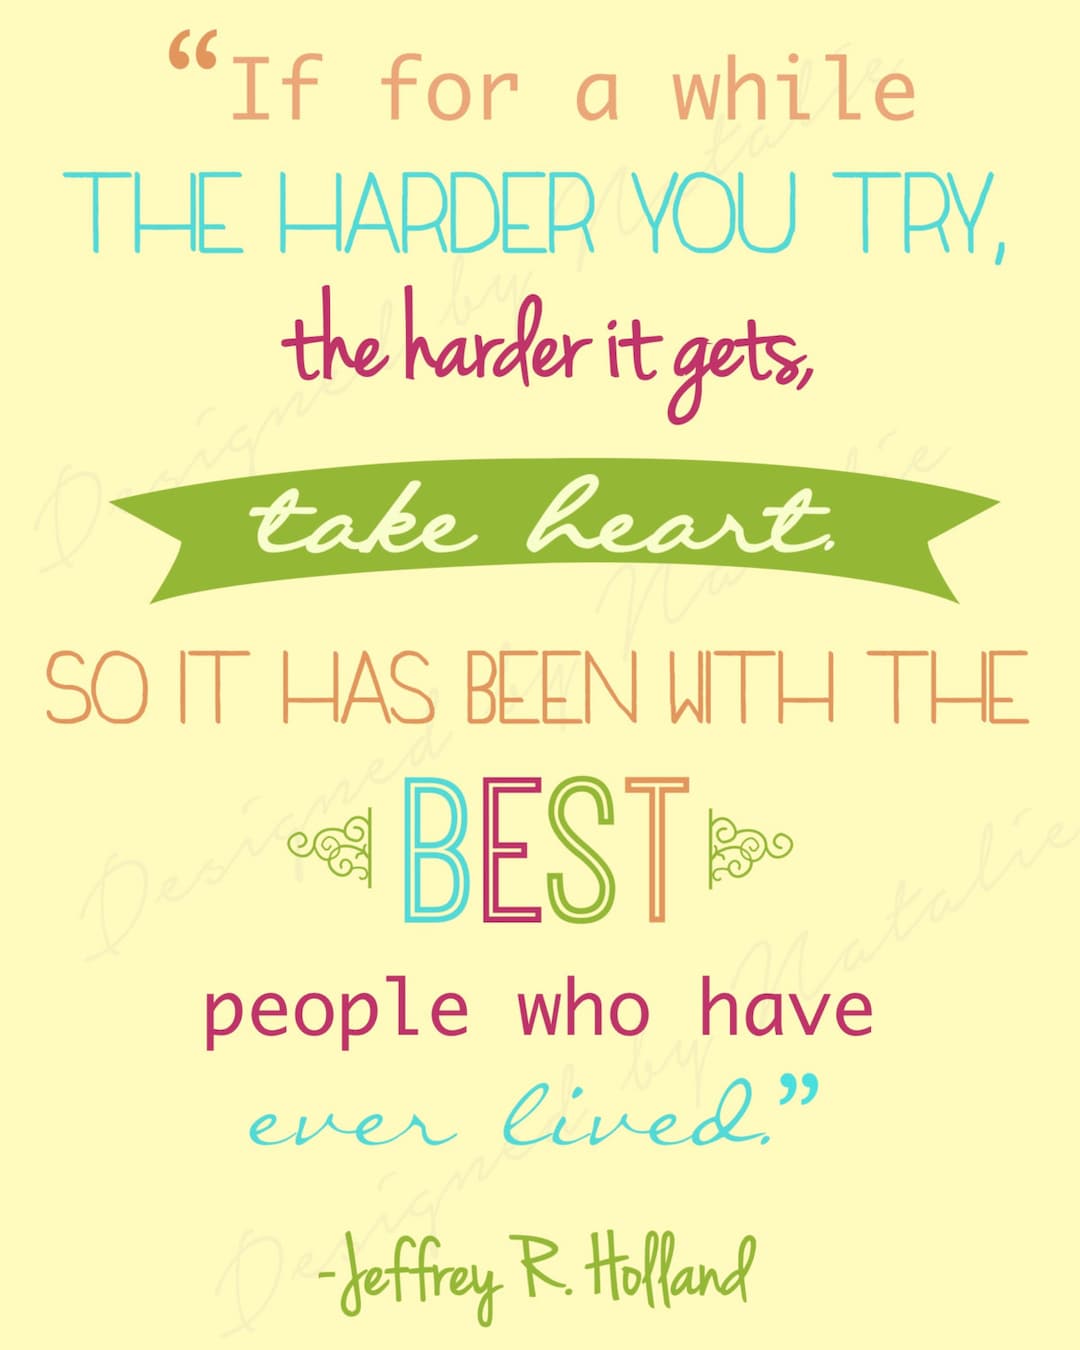 Inspirational Missionary Quote While Harder You Try Take Heart - Etsy